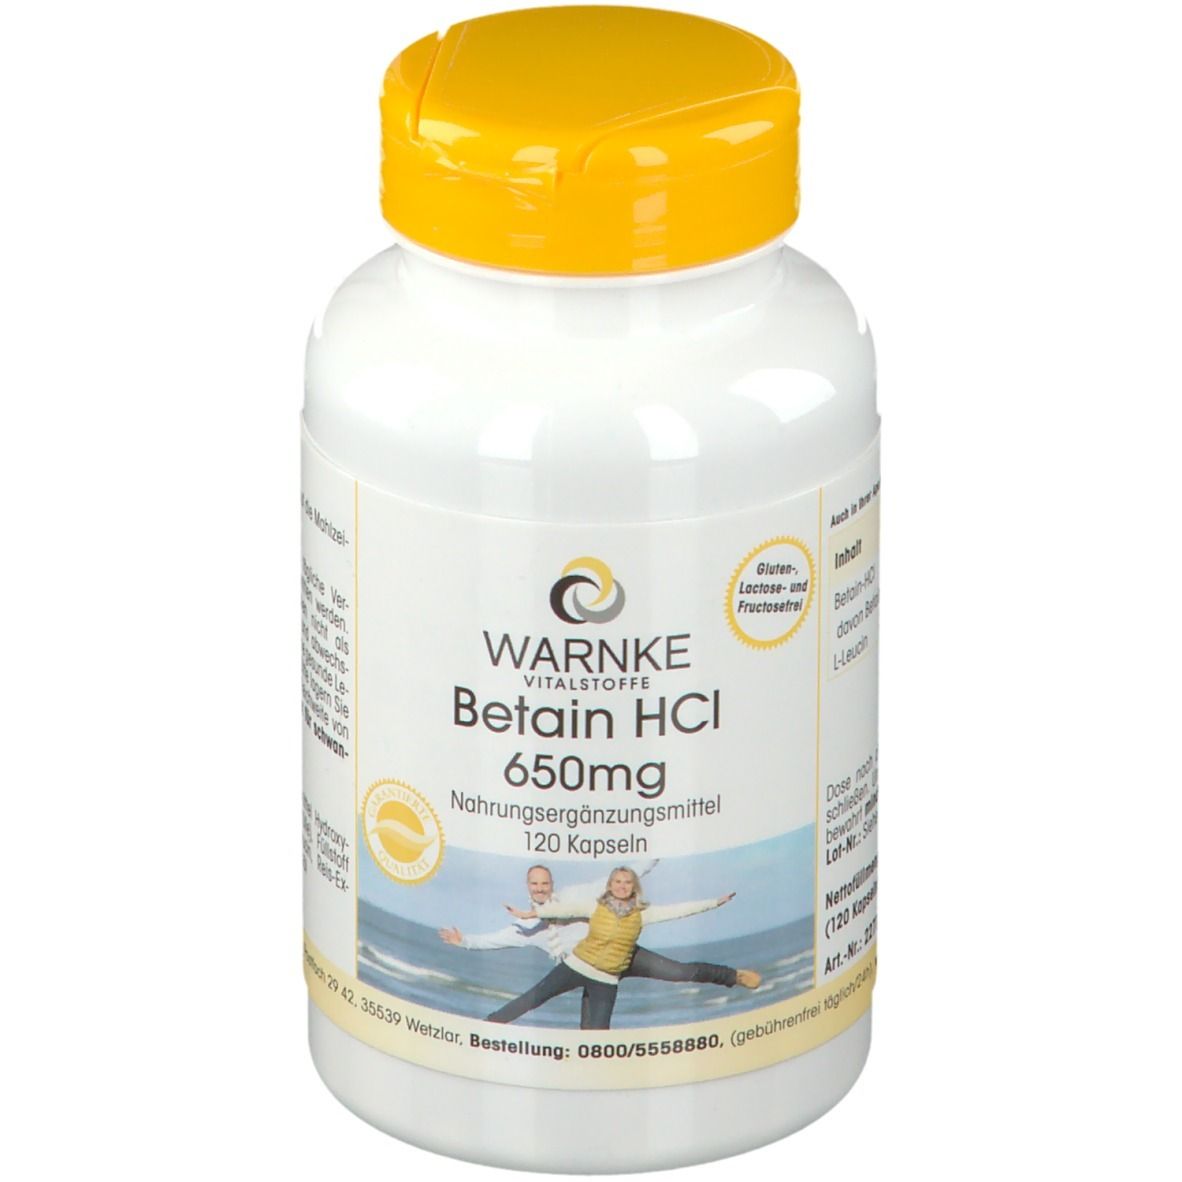 WARNKE Betain HCL 650 mg